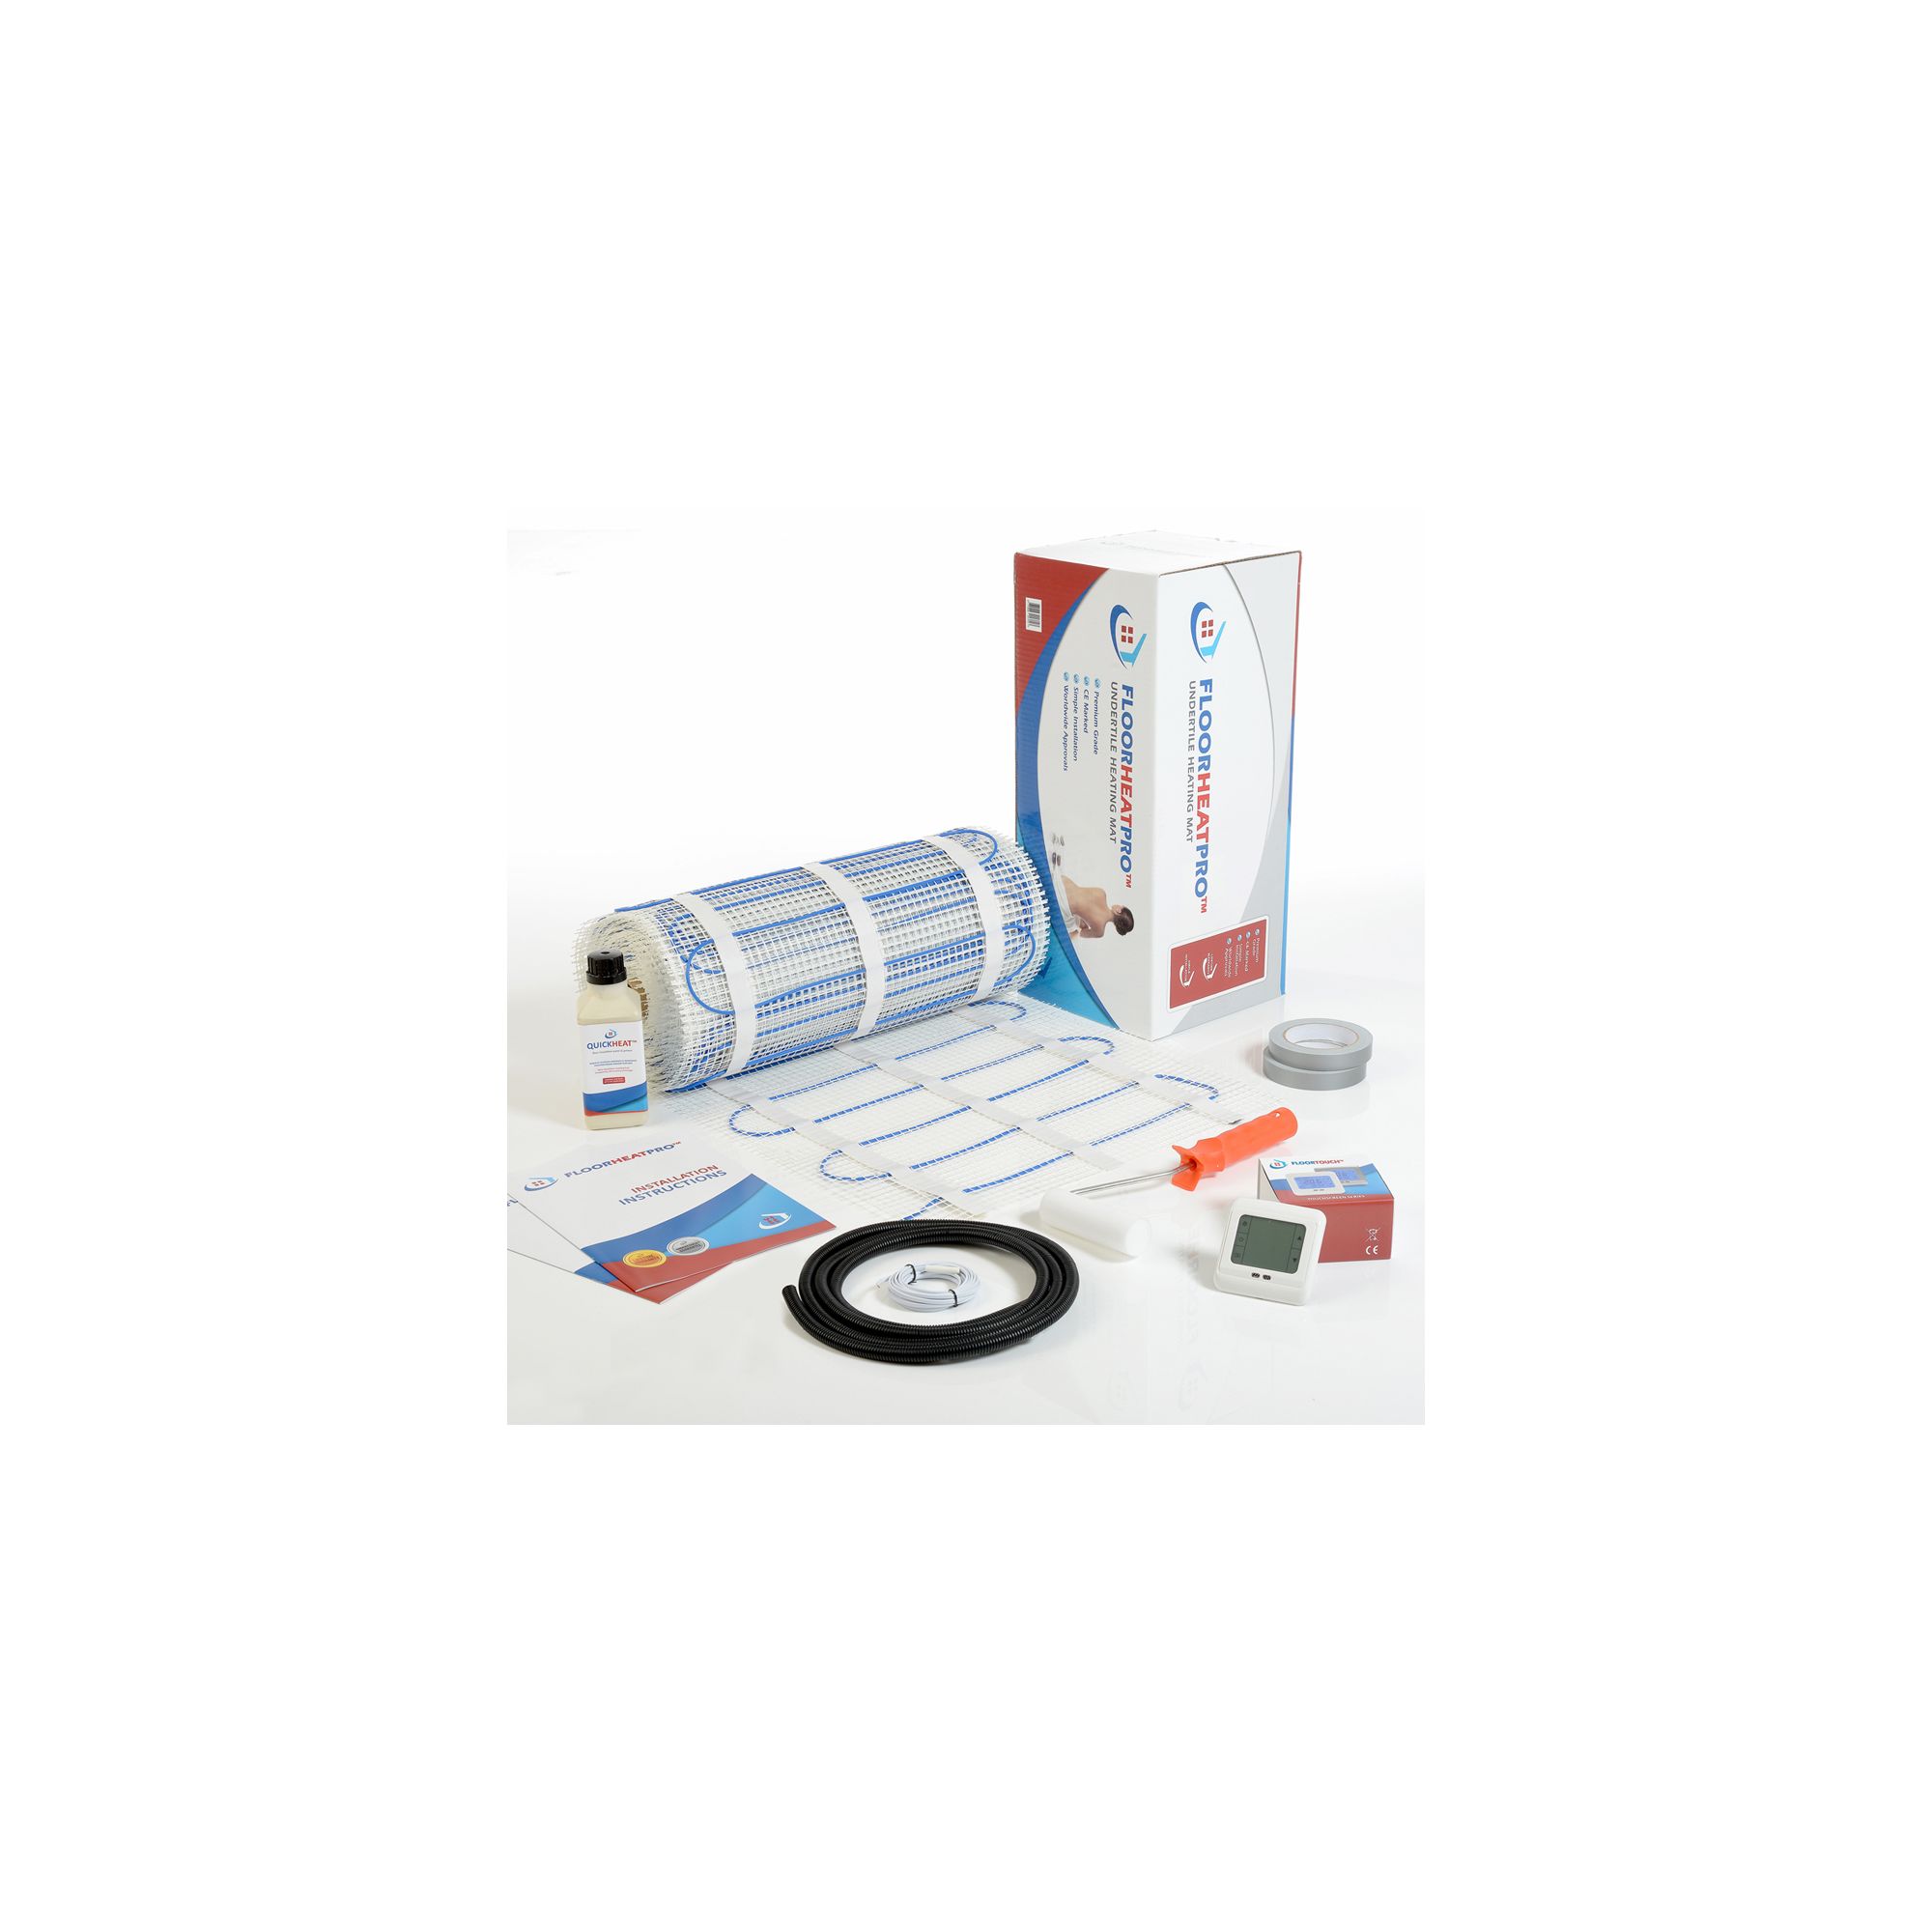 17.0m2 - Underfloor Electric Heating Kit 150w/m2 - Tiles at Tescos Direct